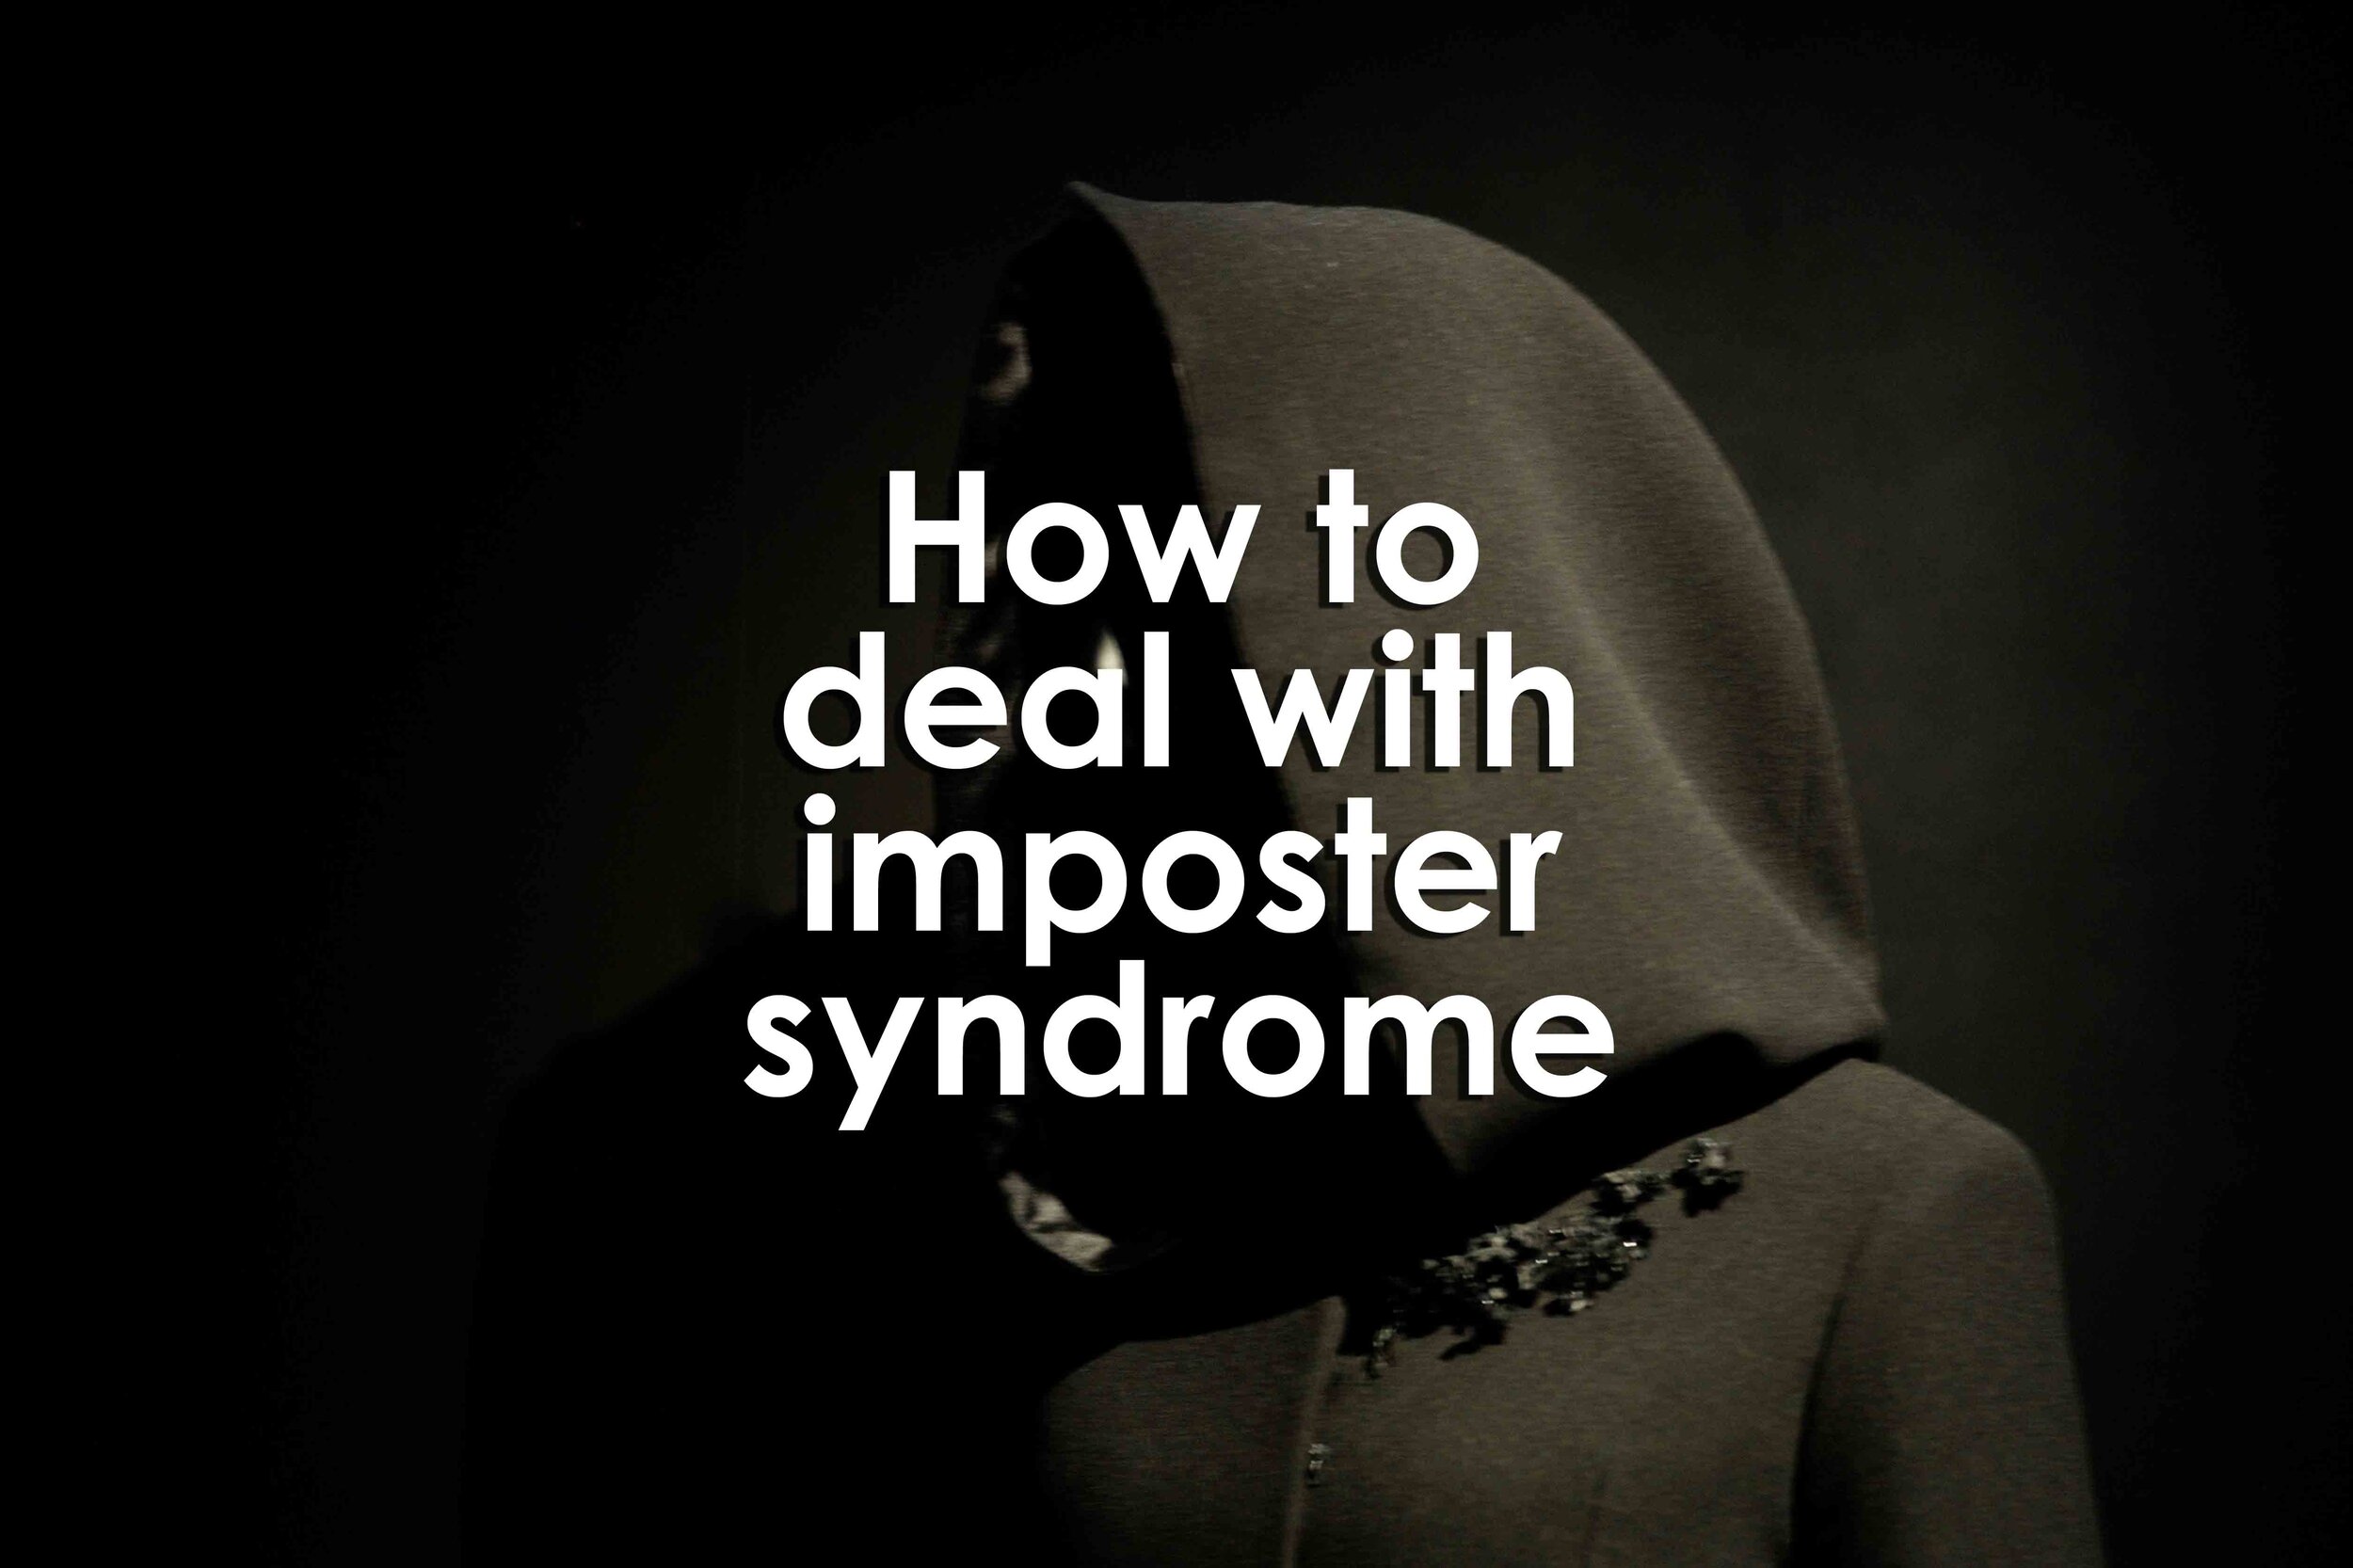 How to Deal With Imposter Syndrome